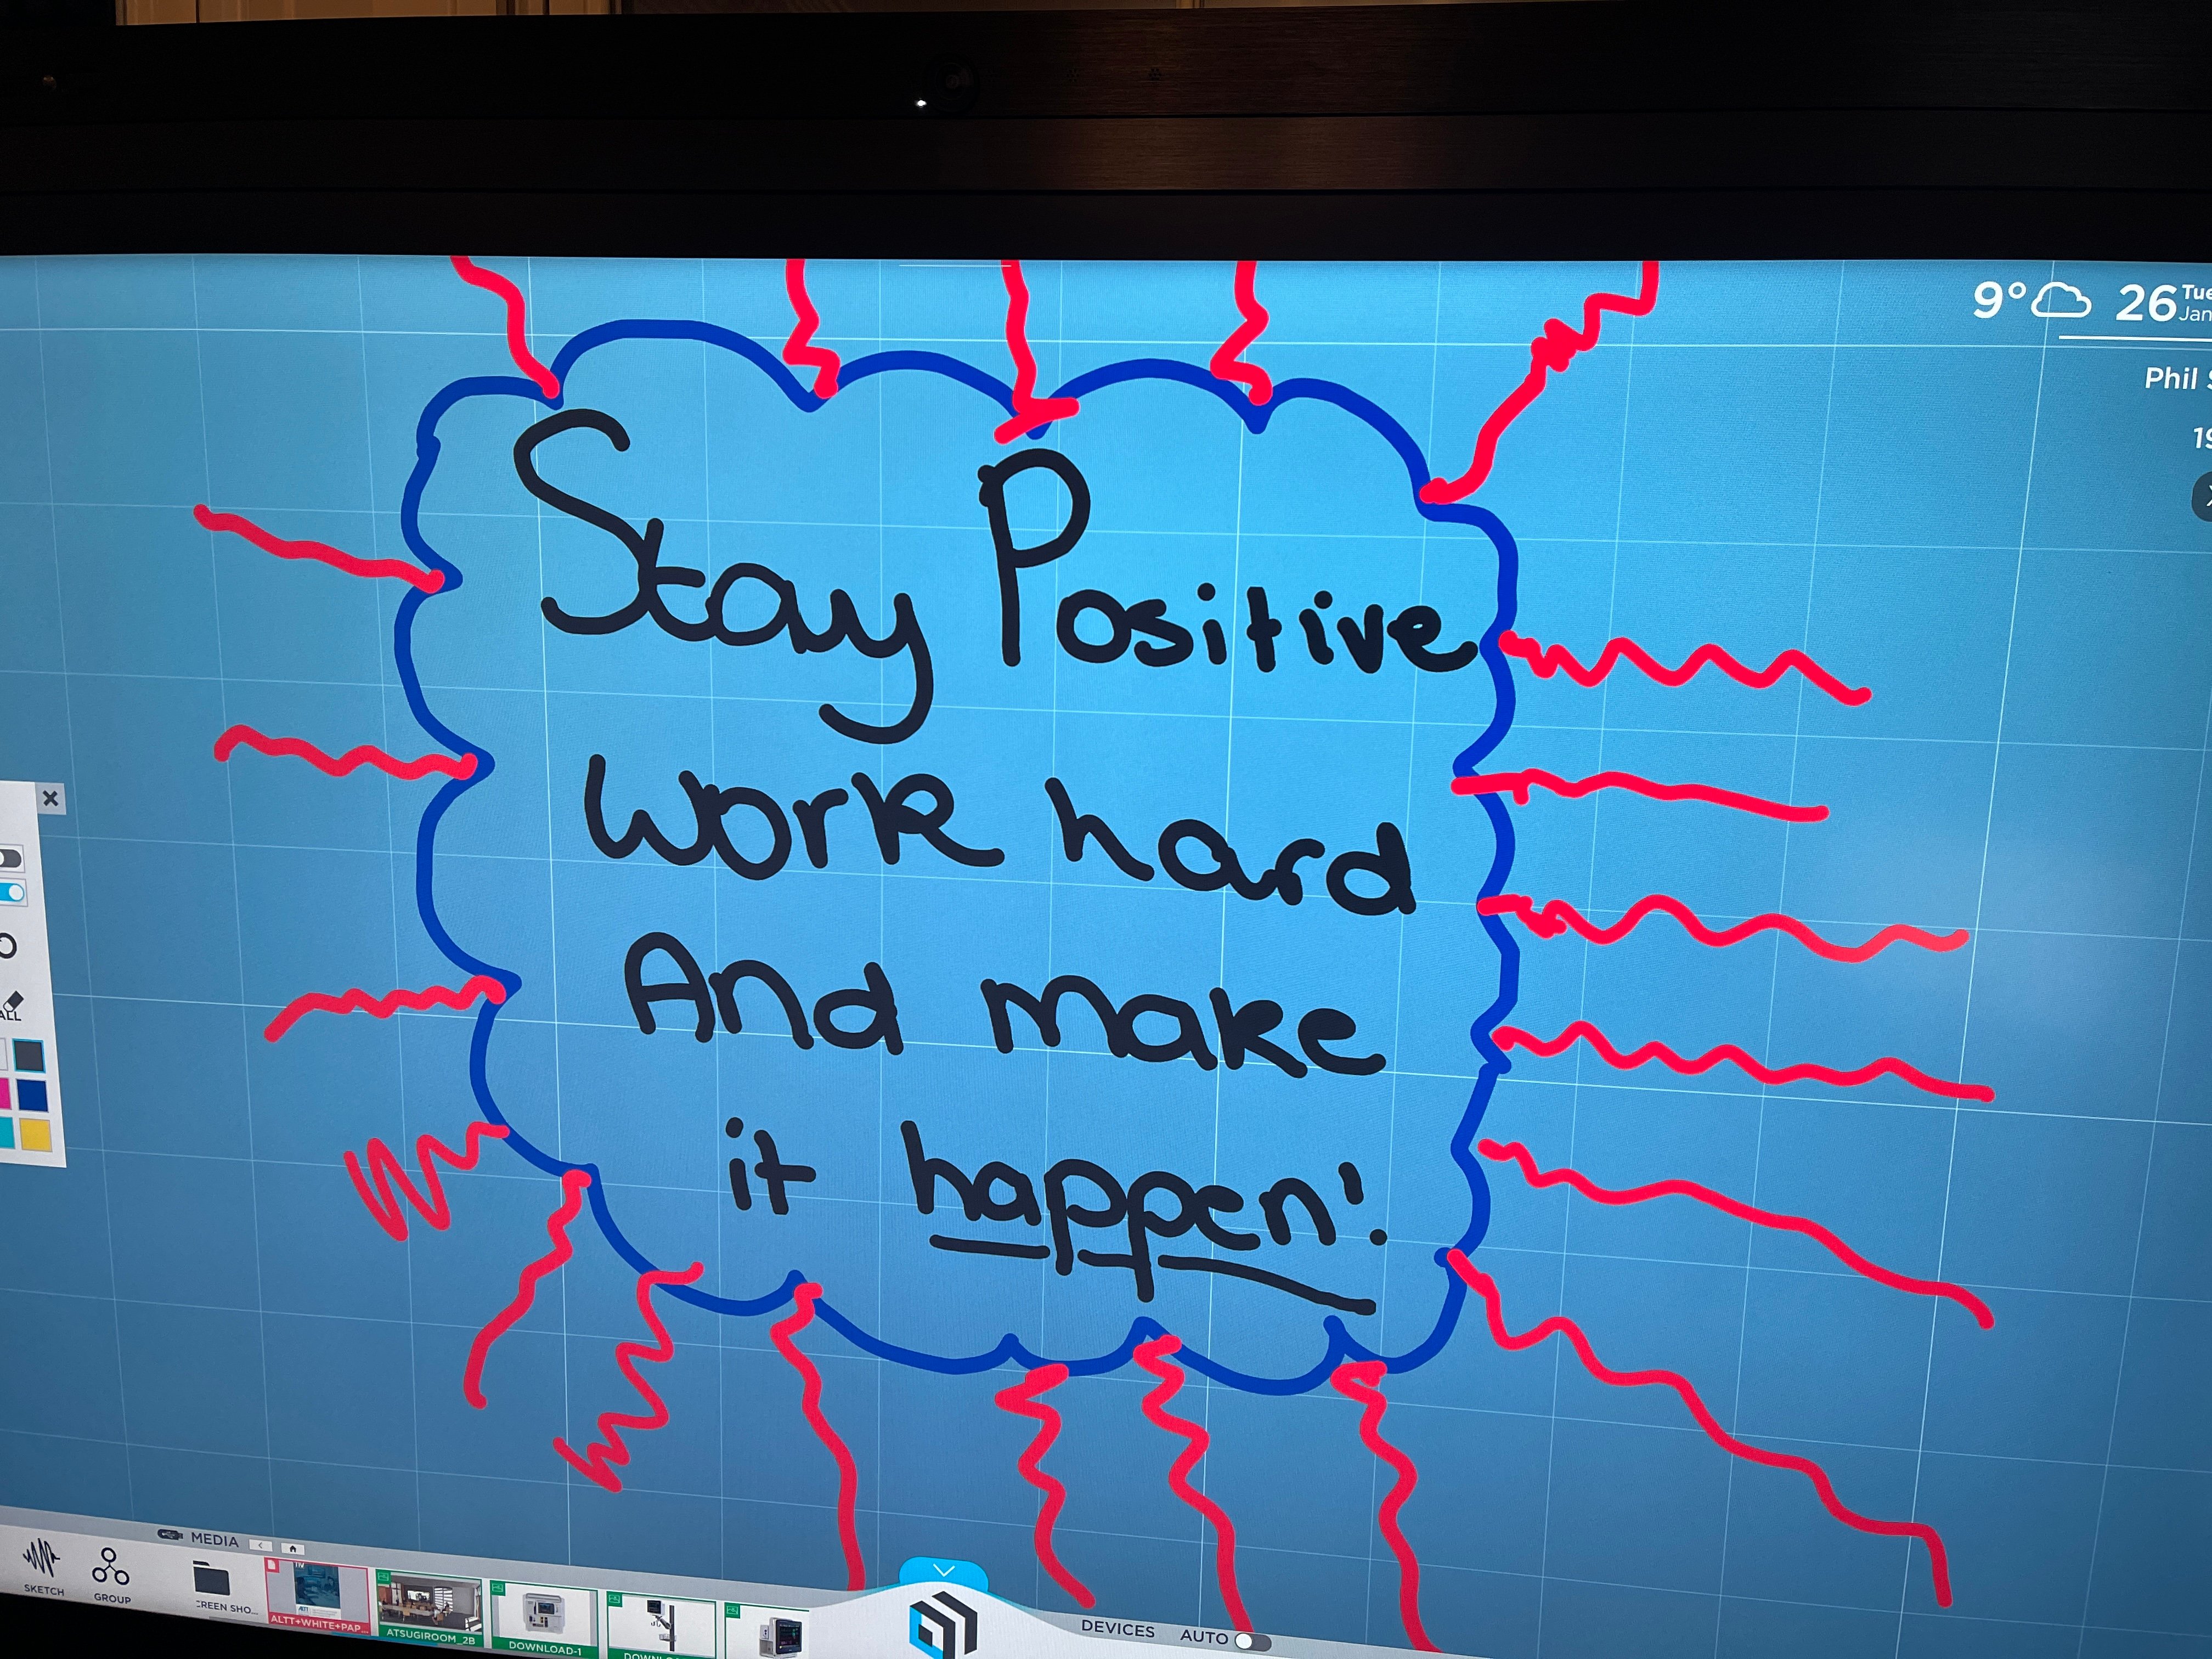 t1v-thinkhub-interactive-canvas-what-inspires-t1v-stay-positive-work-hard